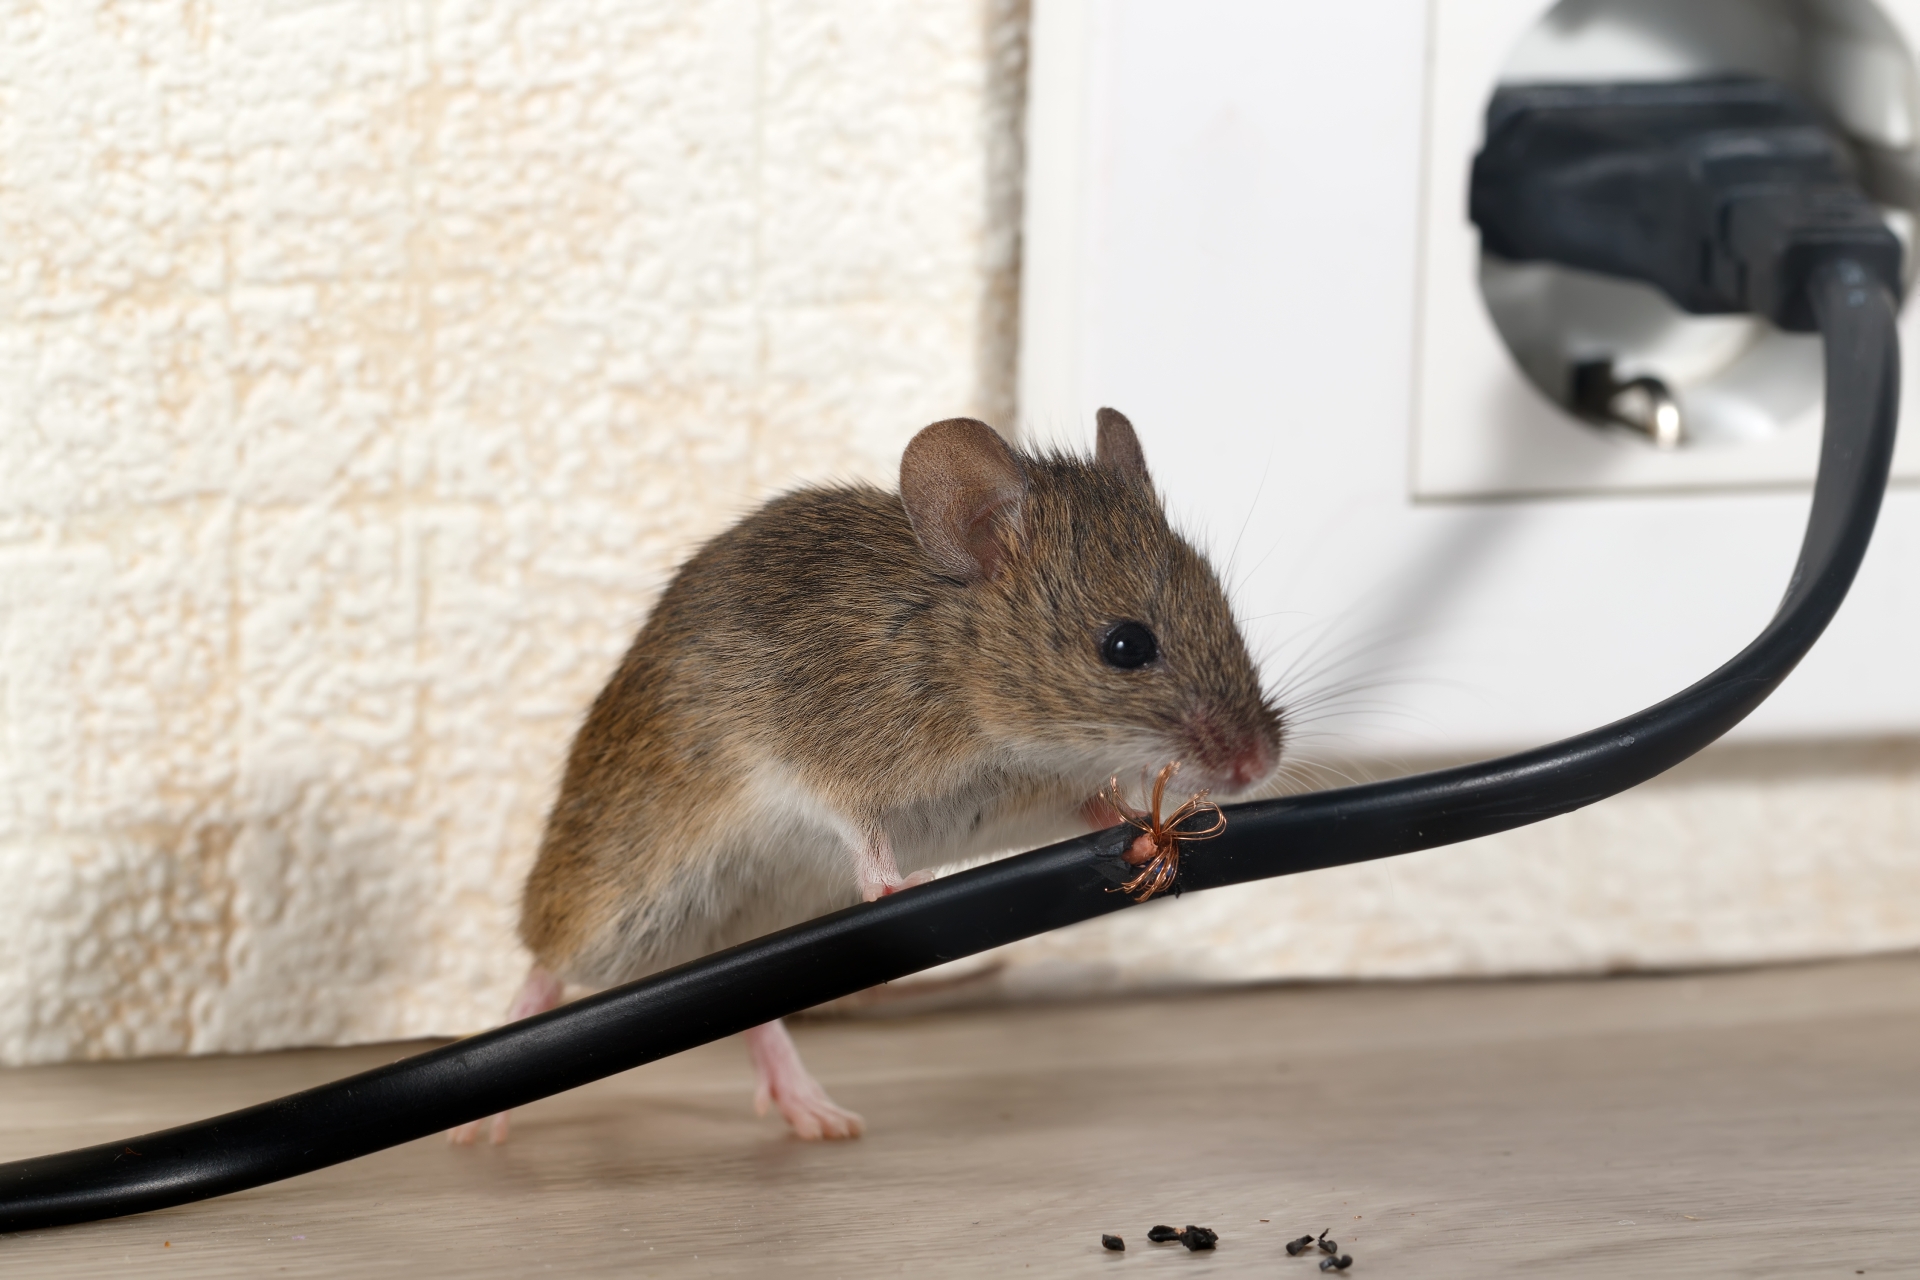 Mice Infestation, Pest Control in Golders Green, Hampstead Garden Suburb, NW11. Call Now 020 8166 9746